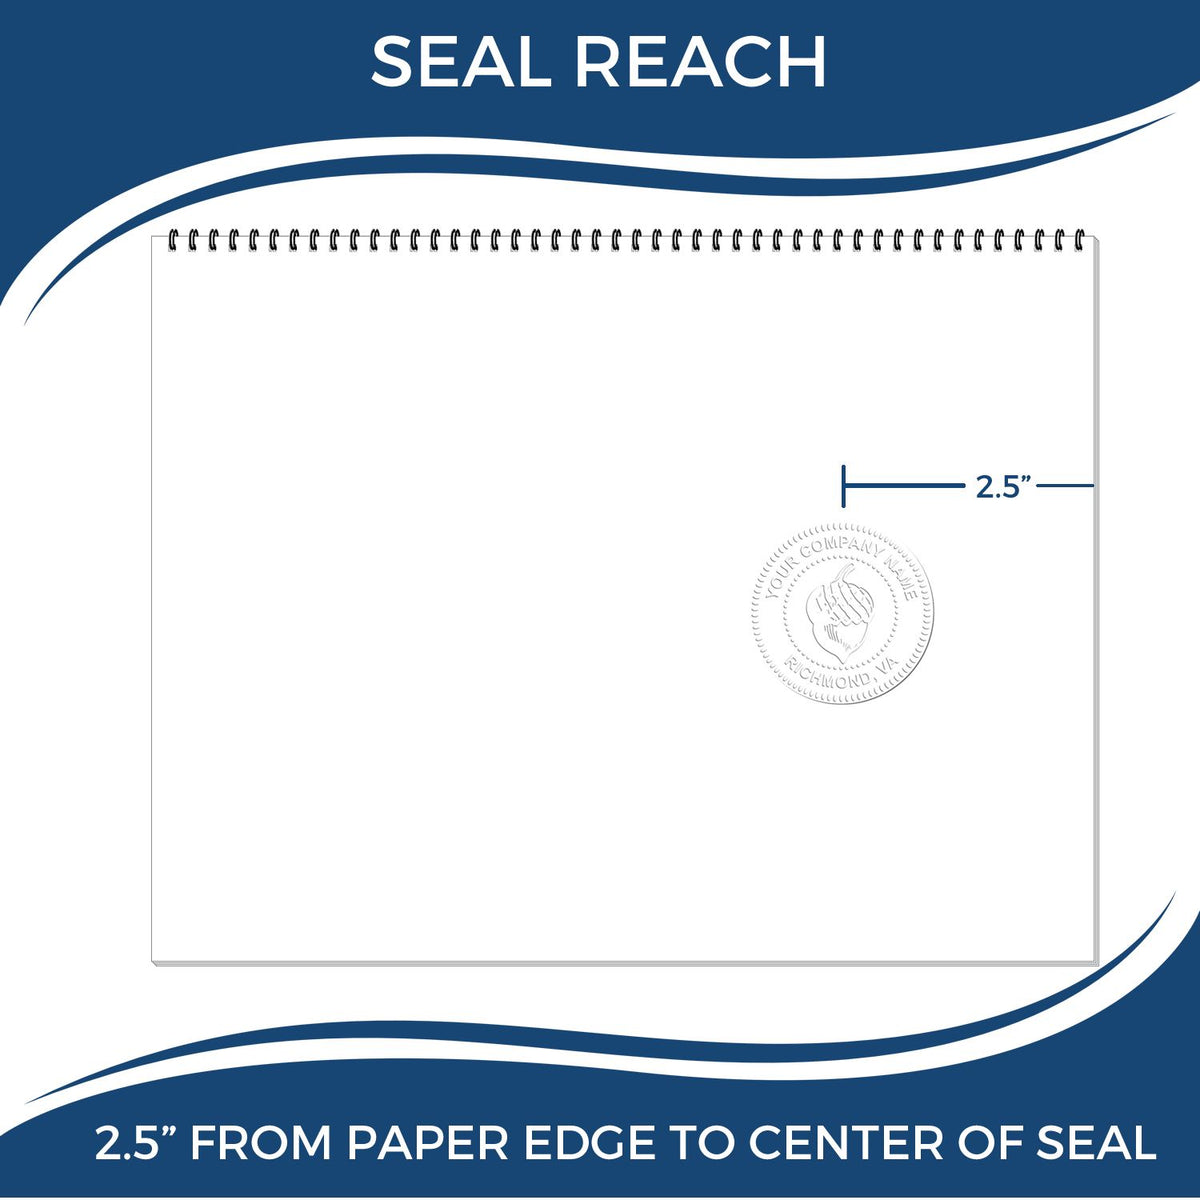 An infographic showing the seal reach which is represented by a ruler and a miniature seal image of the Heavy Duty Cast Iron Tennessee Architect Embosser